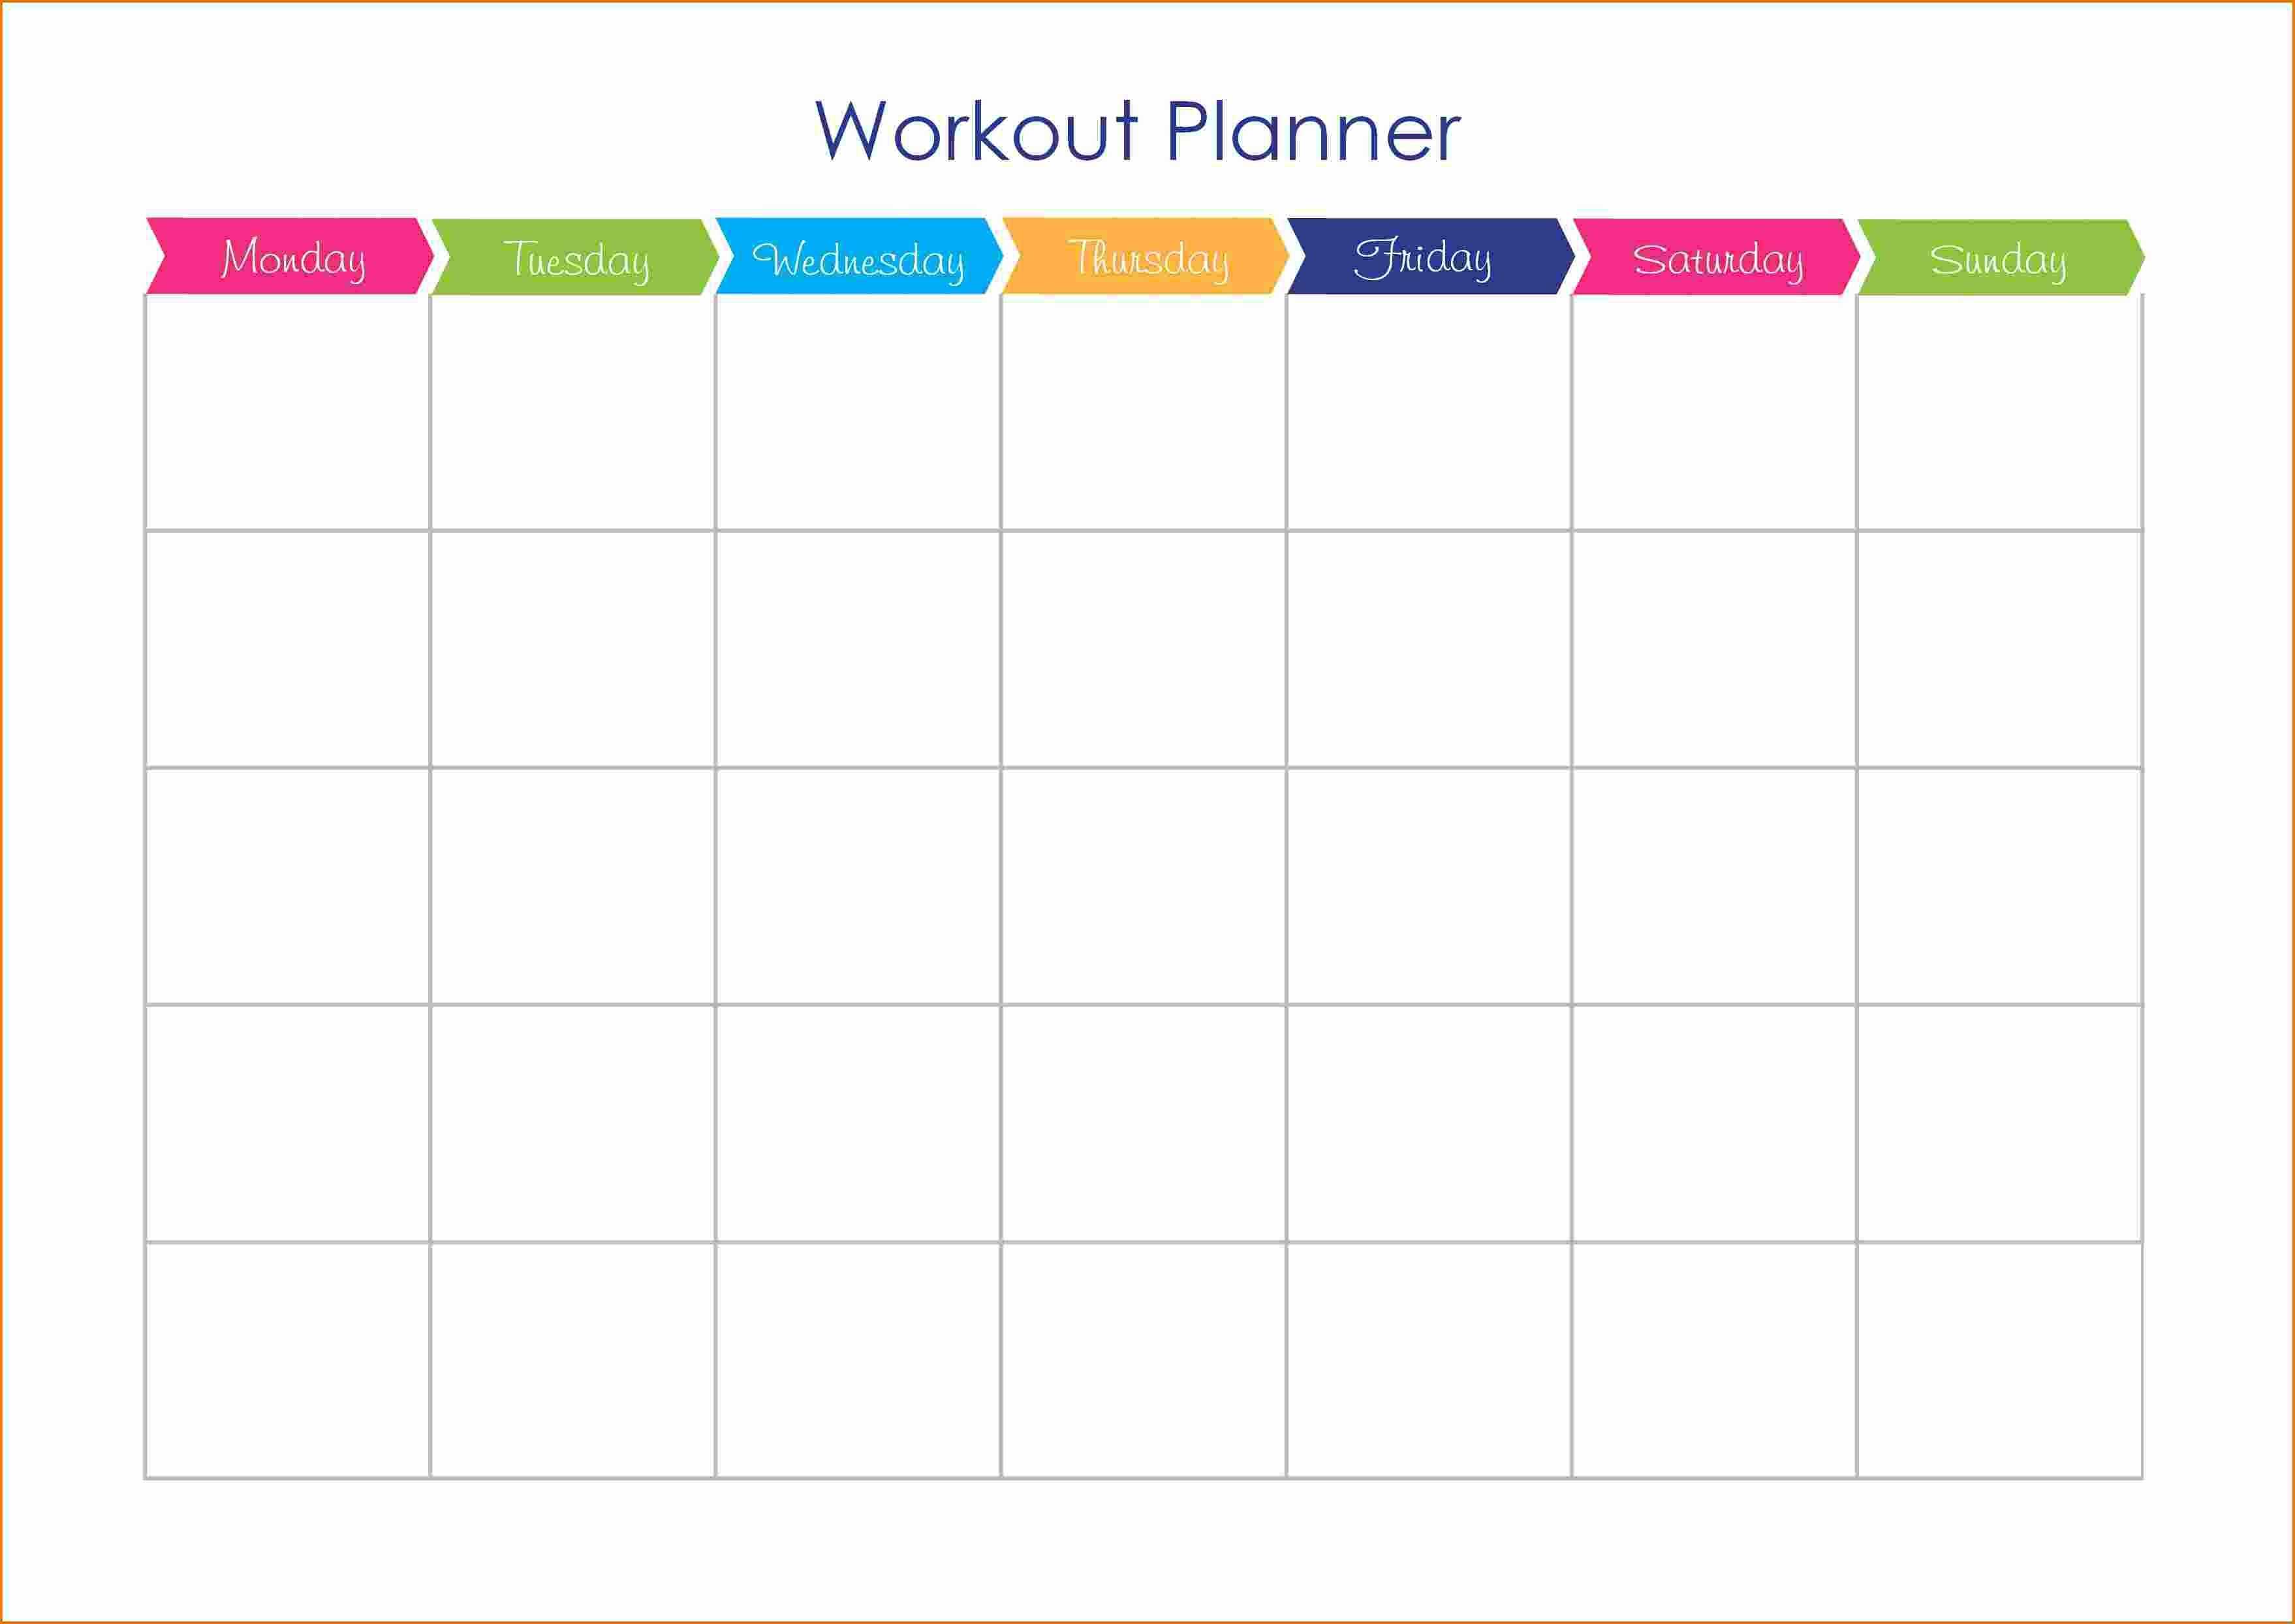 Workout Plan Calendar Template Workout And Yoga Pics For Blank Workout Schedule Template